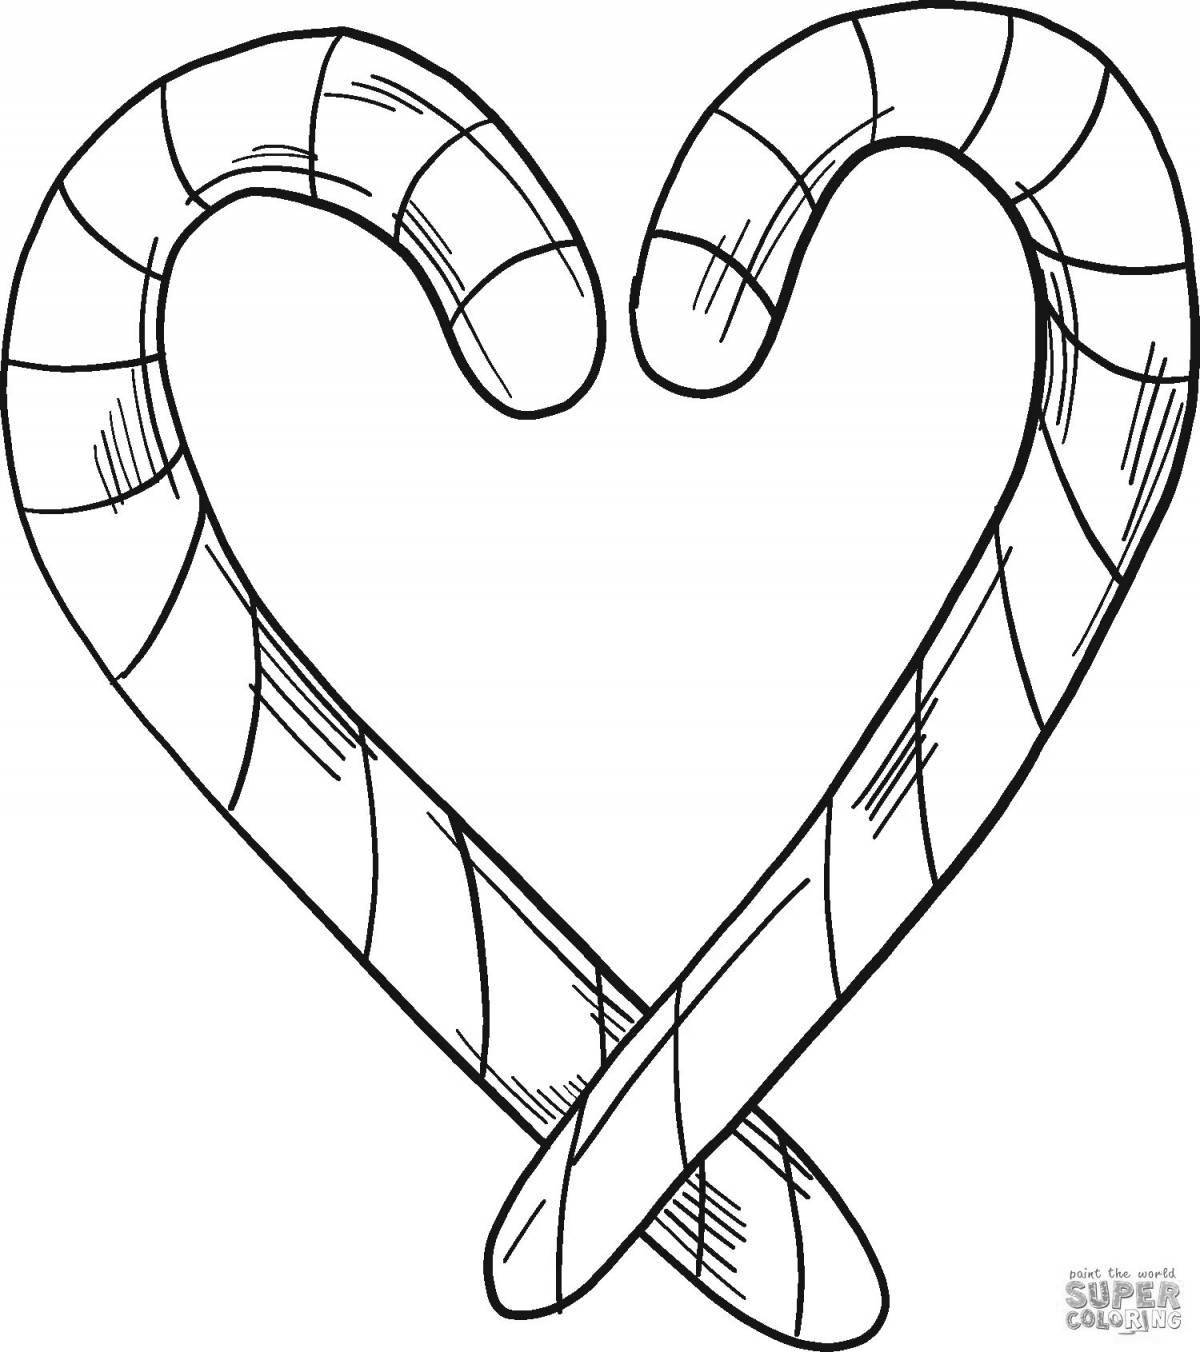 Glowing candy cane coloring page